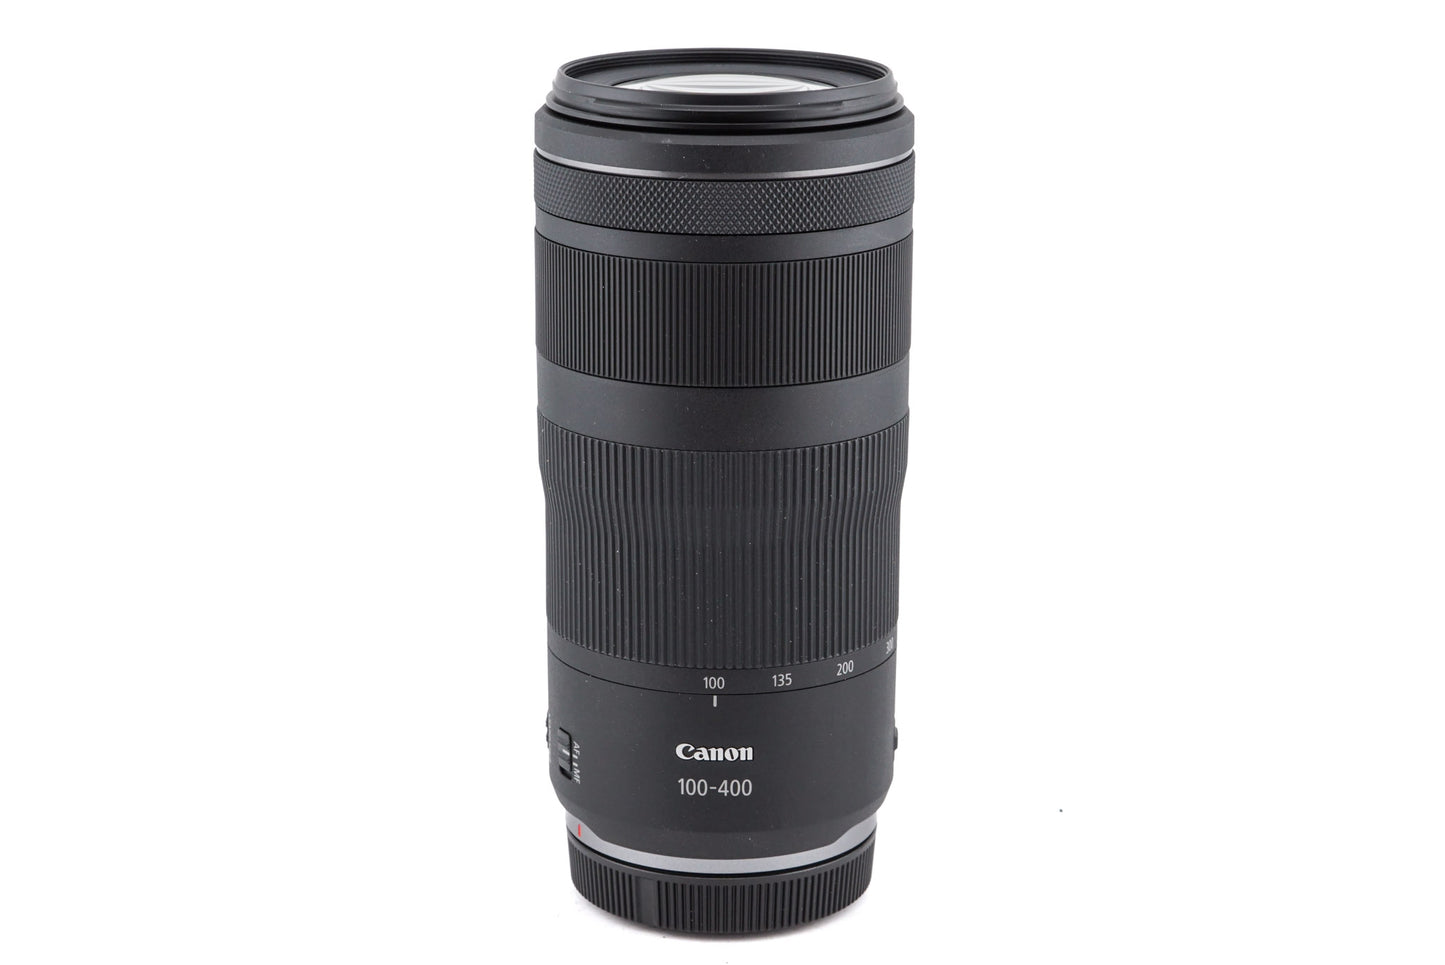 Canon 100-400mm f5.6-8 IS USM - Lens